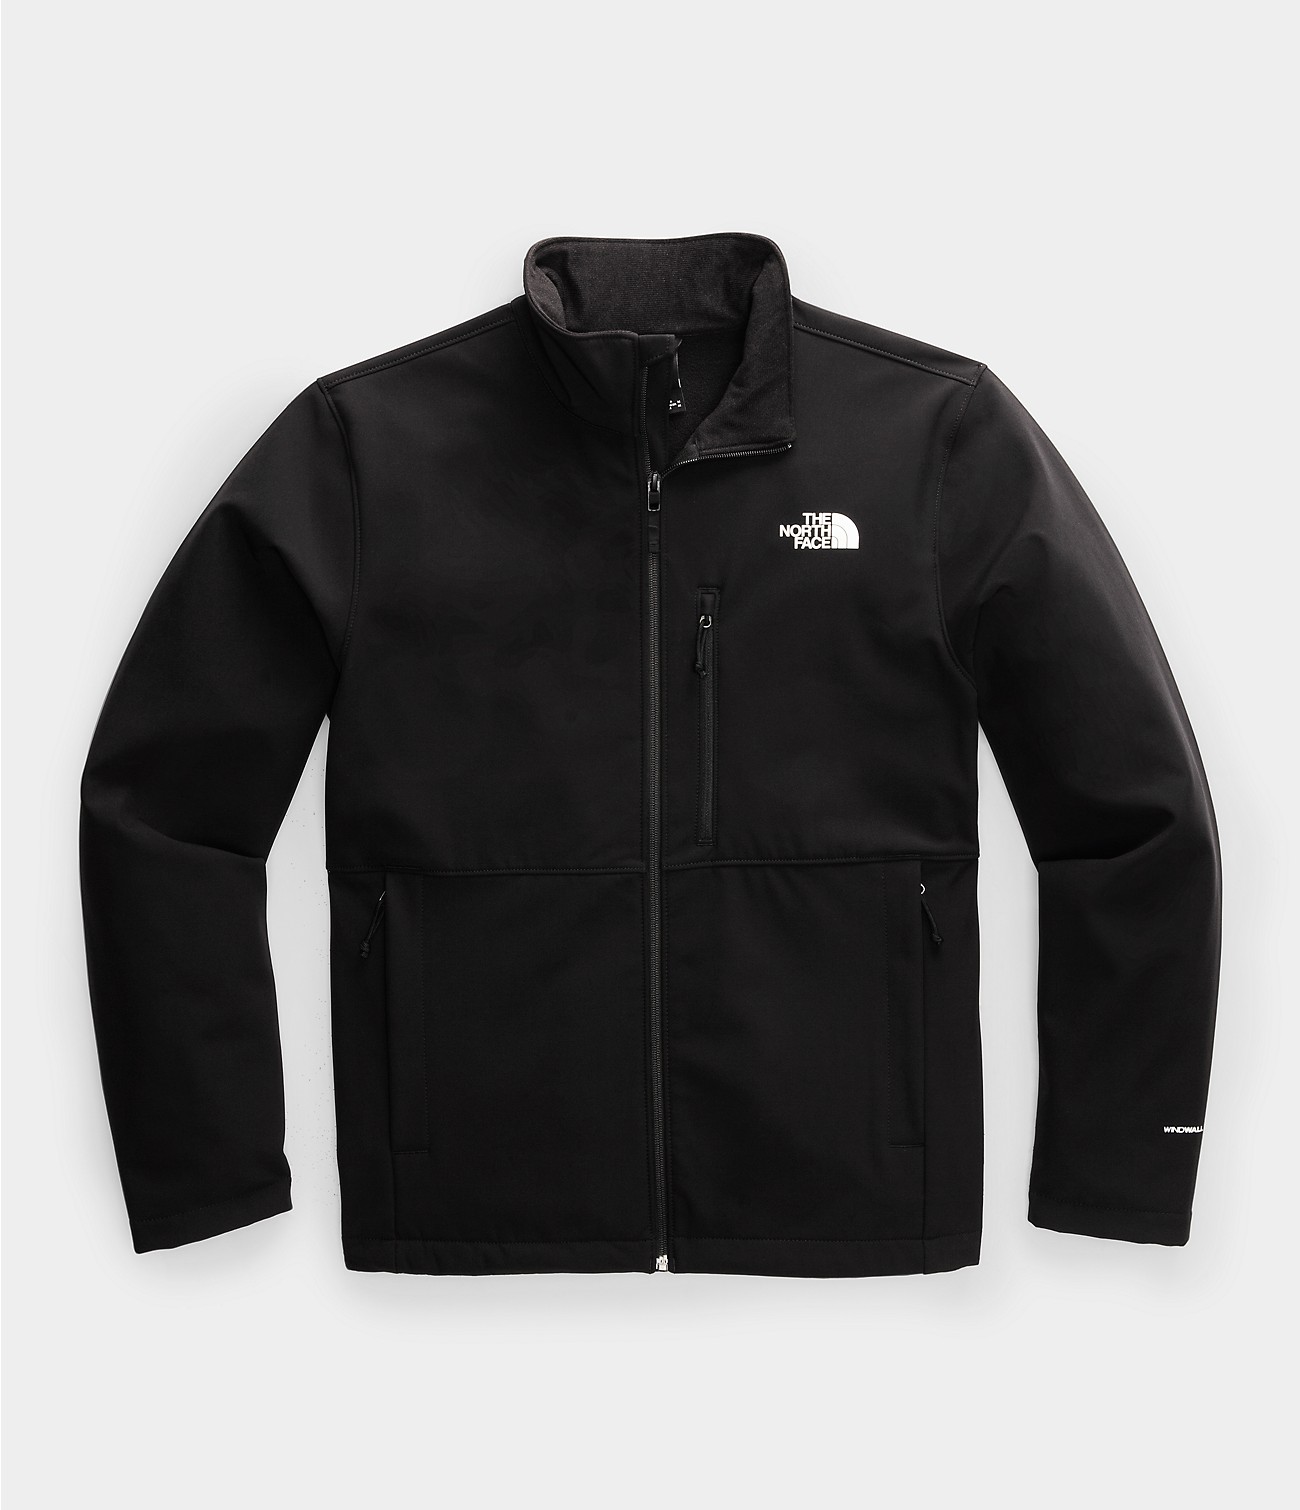 Unlock Wilderness' choice in the Columbia Vs North Face comparison, the Men’s Apex Bionic Jacket by The North Face